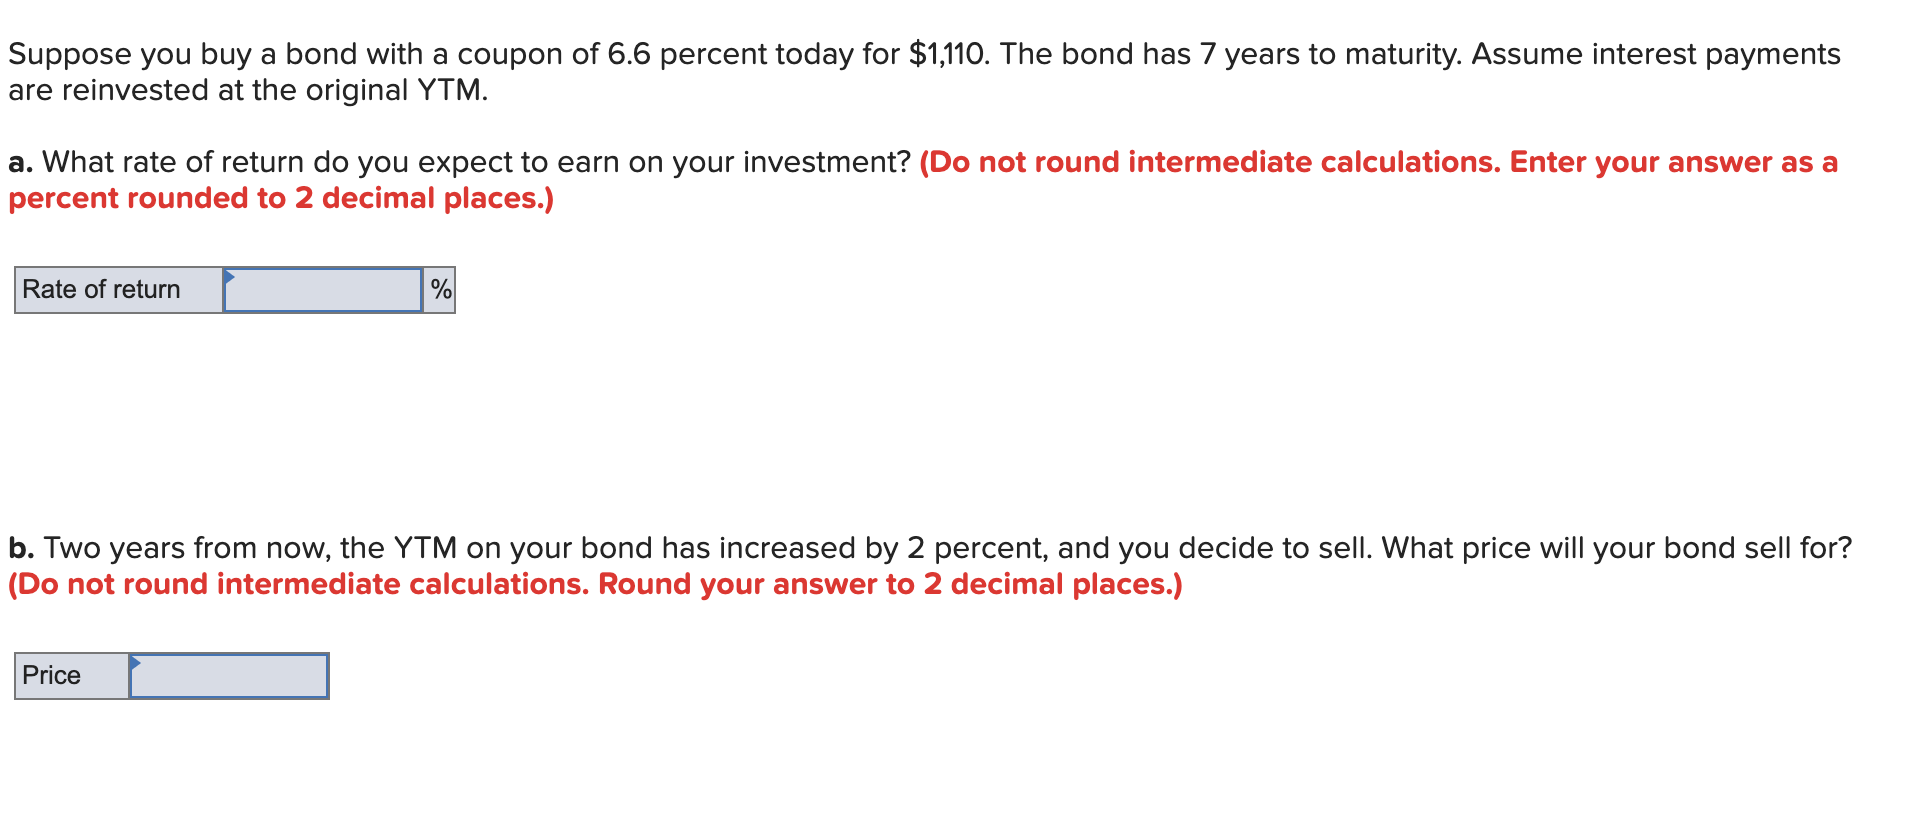 Suppose you buy a bond with a coupon of 6.6 percent today for $1,110. The bond has 7 years to maturity. Assume interest payments
are reinvested at the original YTM
a. What rate of return do you expect to earn on your investment? (Do not round intermediate calculations. Enter your answer as a
percent rounded to 2 decimal places.)
Rate of return
b. Two years from now, the YTM on your bond has increased by 2 percent, and you decide to sell. What price will your bond sell for?
|(Do not round intermediate calculations. Round your answer to 2 decimal places.)
Price
